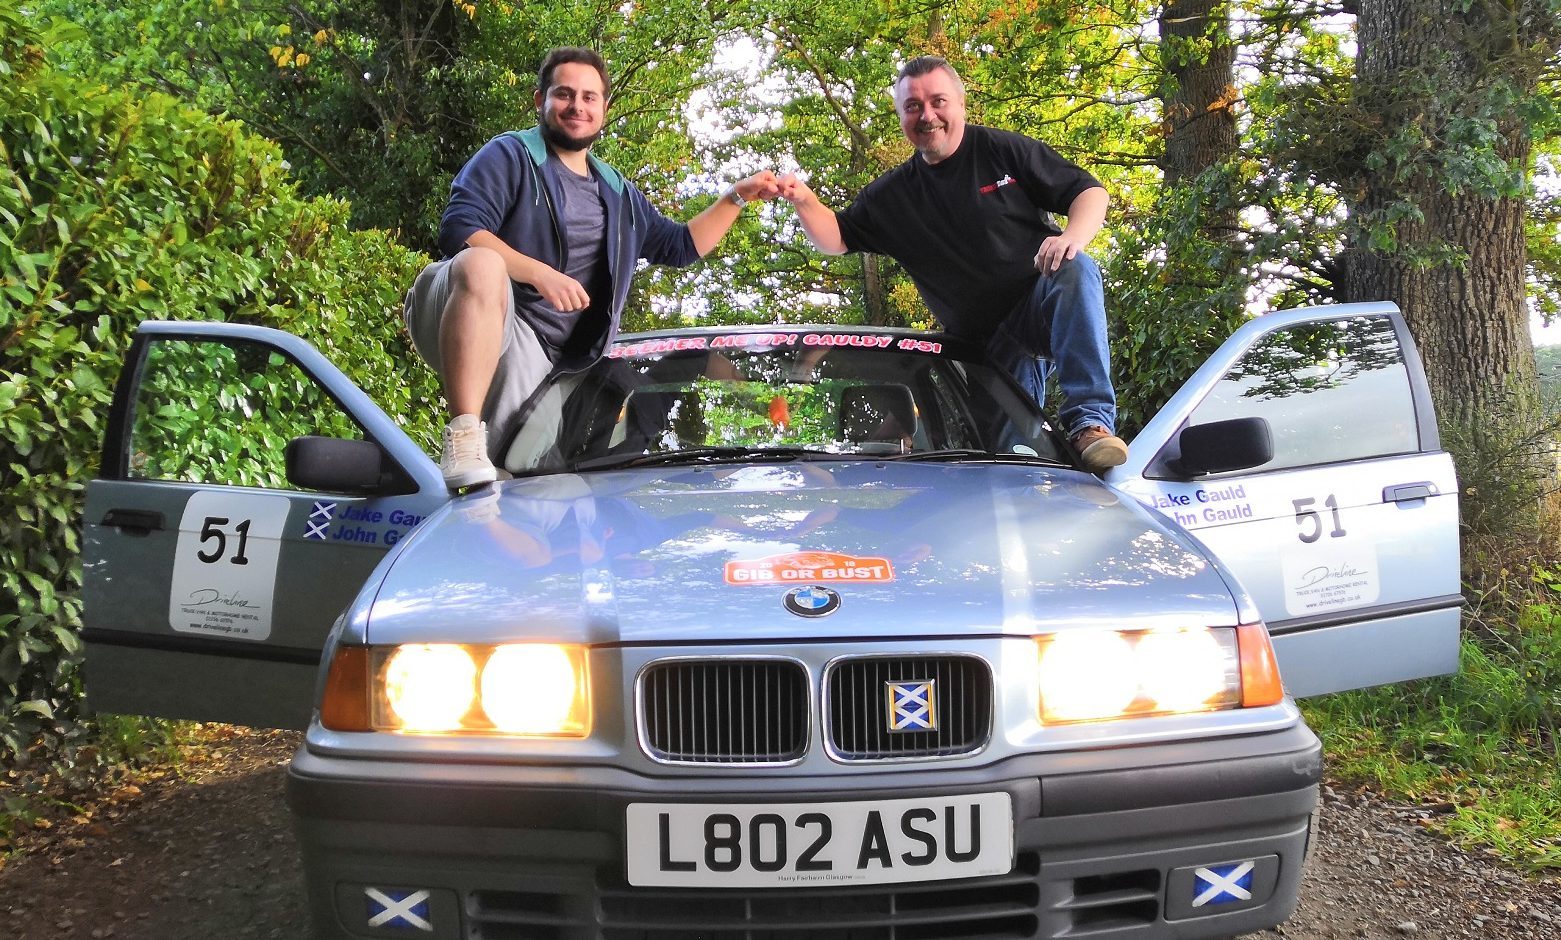 Jake and John will take on the challenge in their BMW.